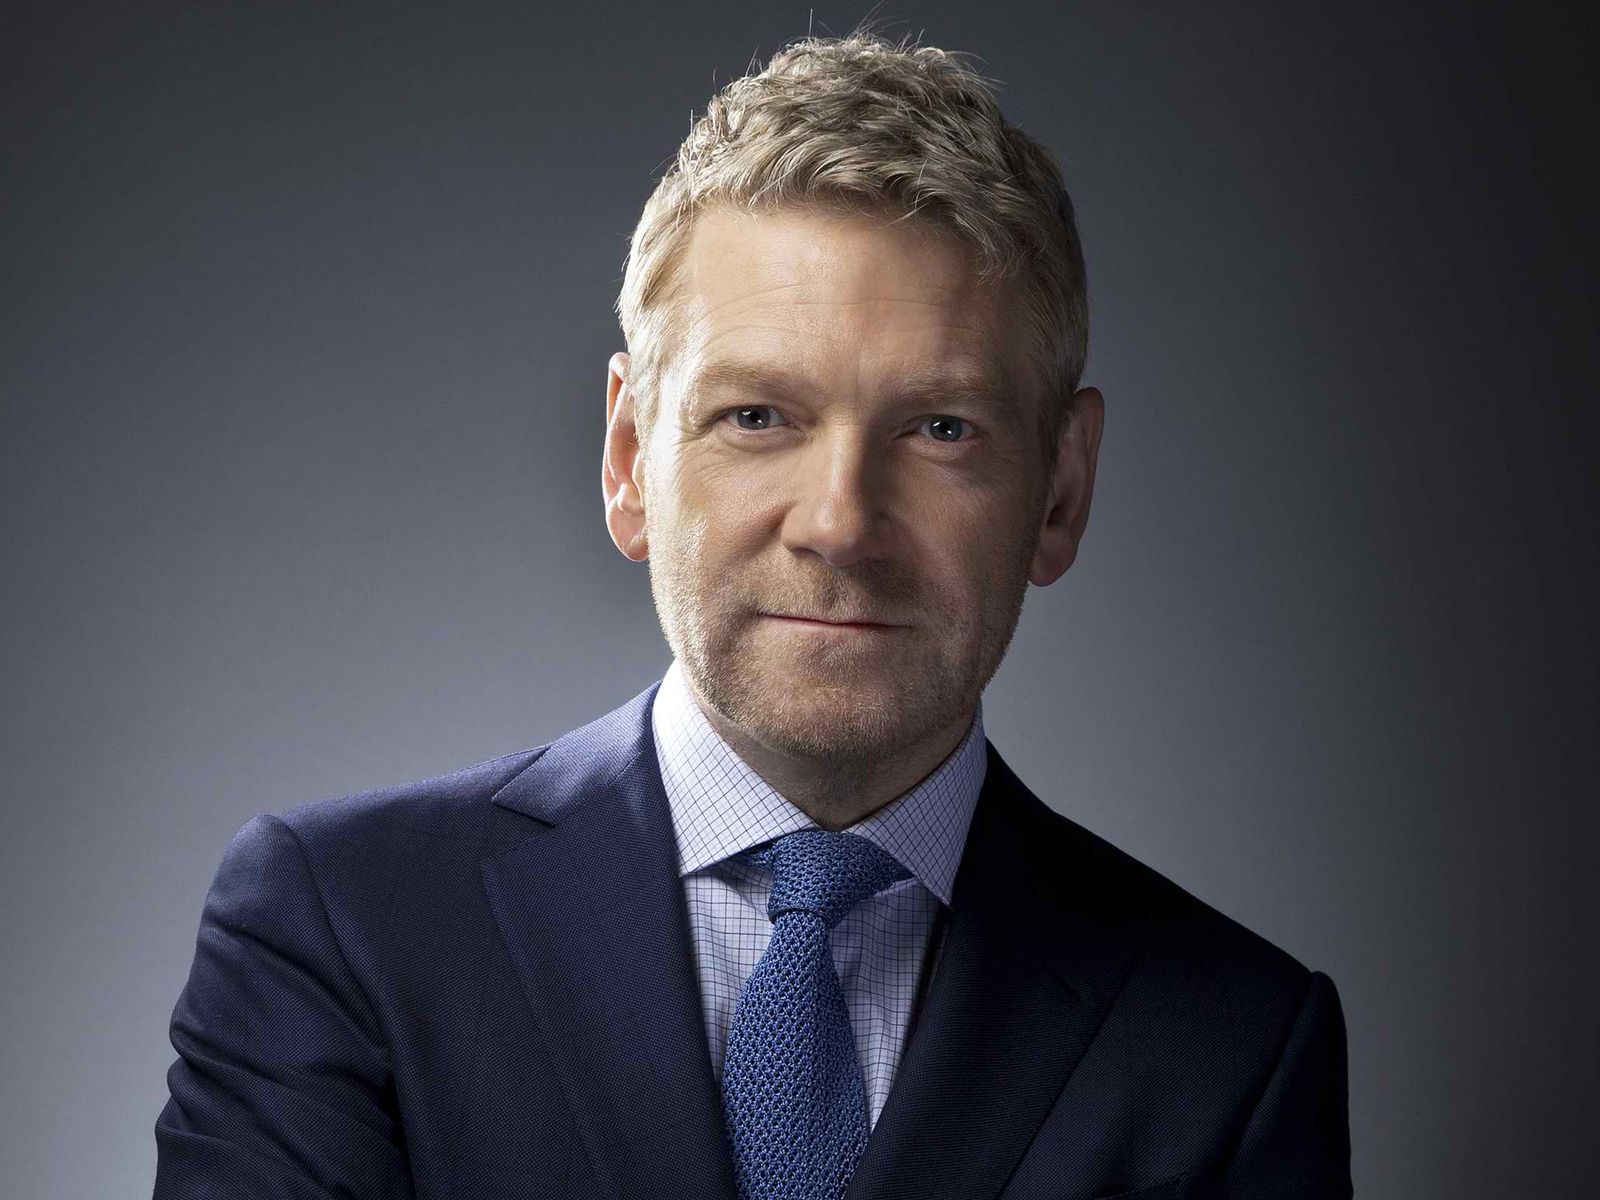 Hollywood Actor Kenneth Branagh Will Receive Awards At Camerimage Film Festival